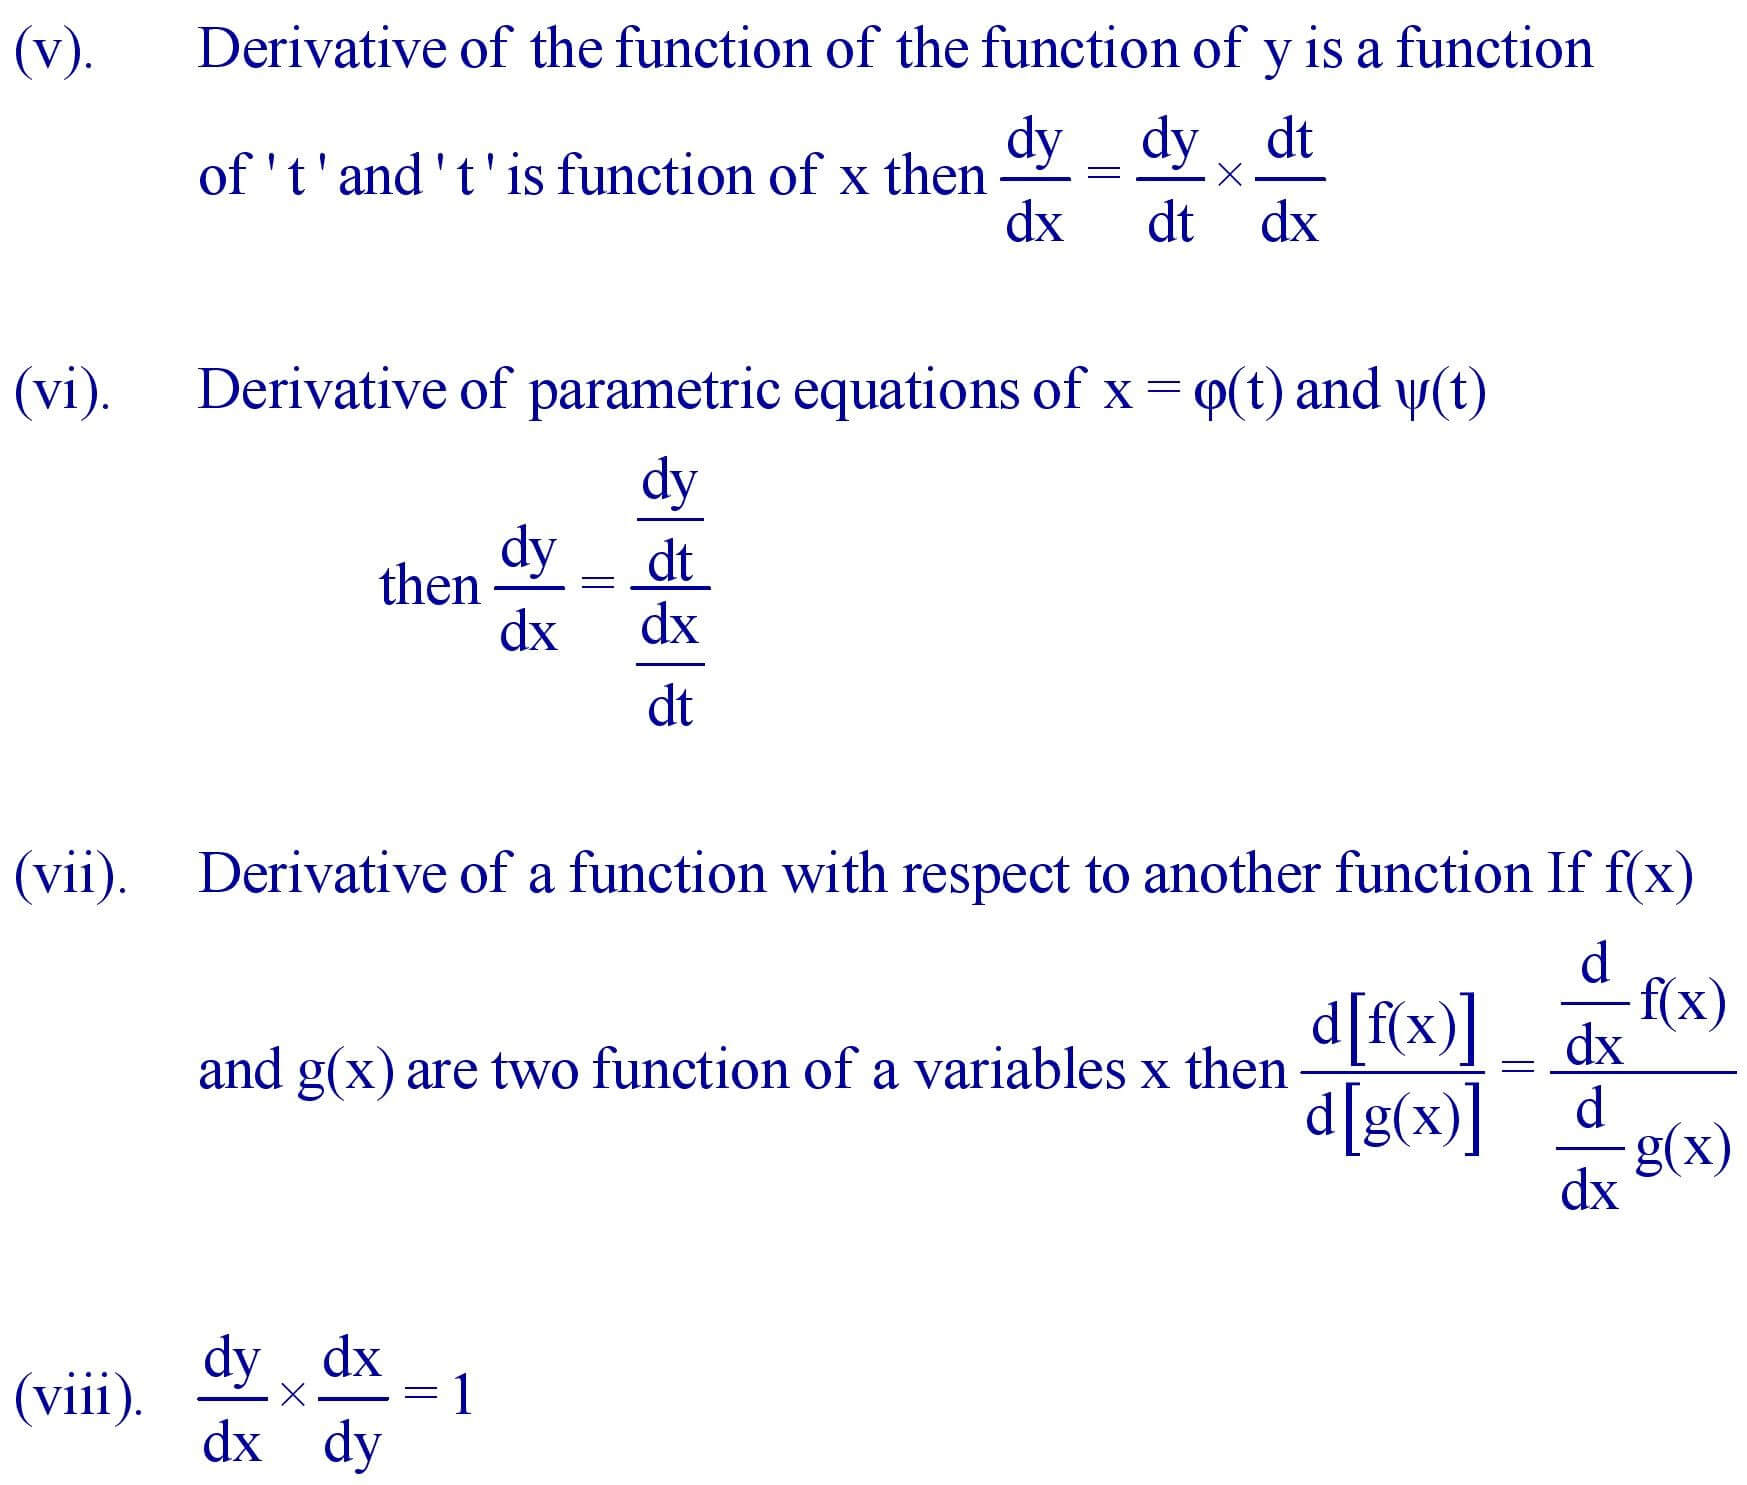 Some theorems on differentition